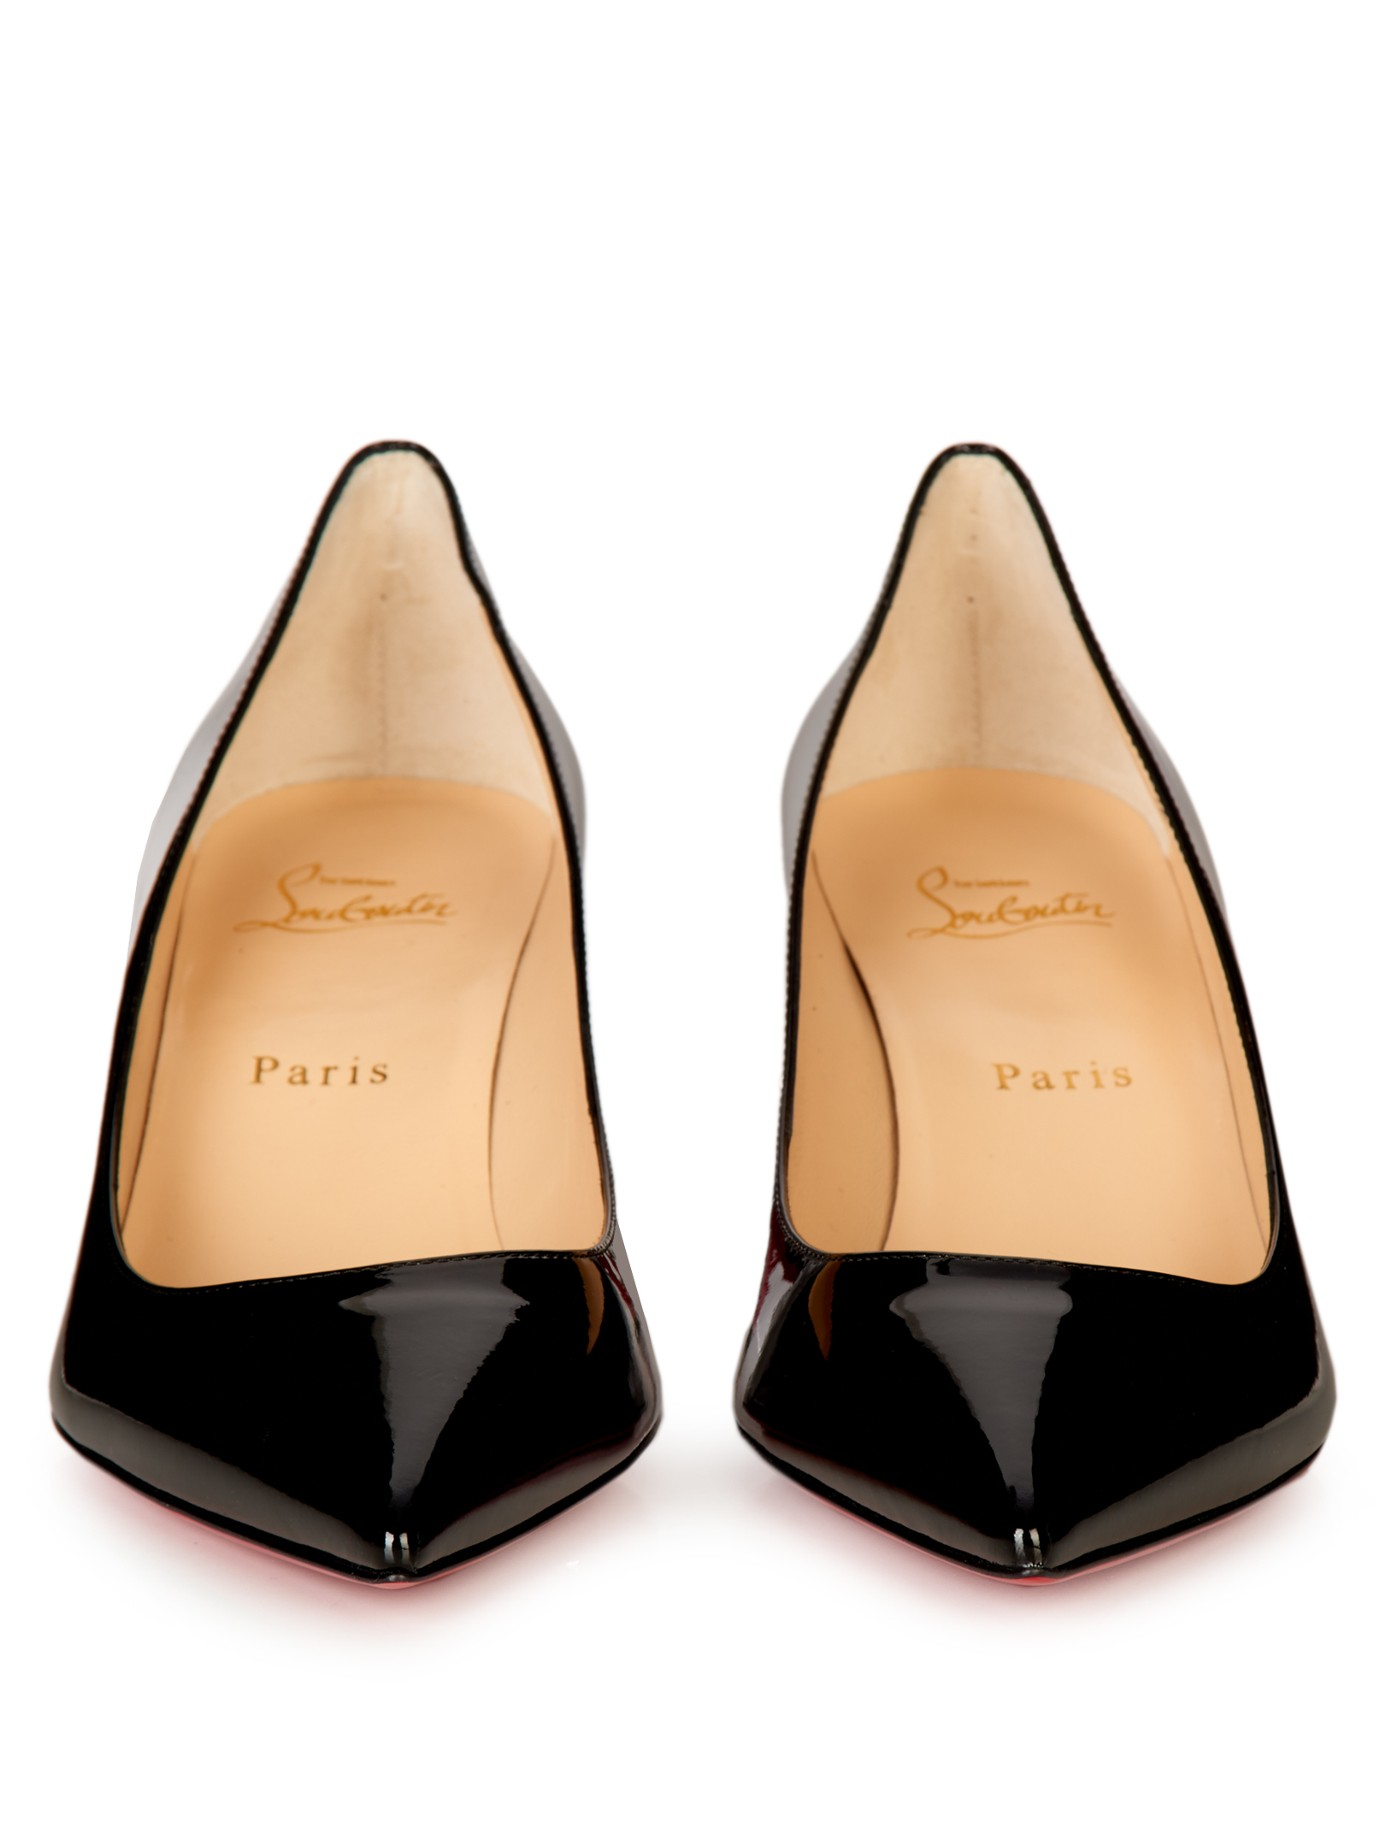 Christian Louboutin Pigalle Follies 55mm Patent-leather Pumps in 